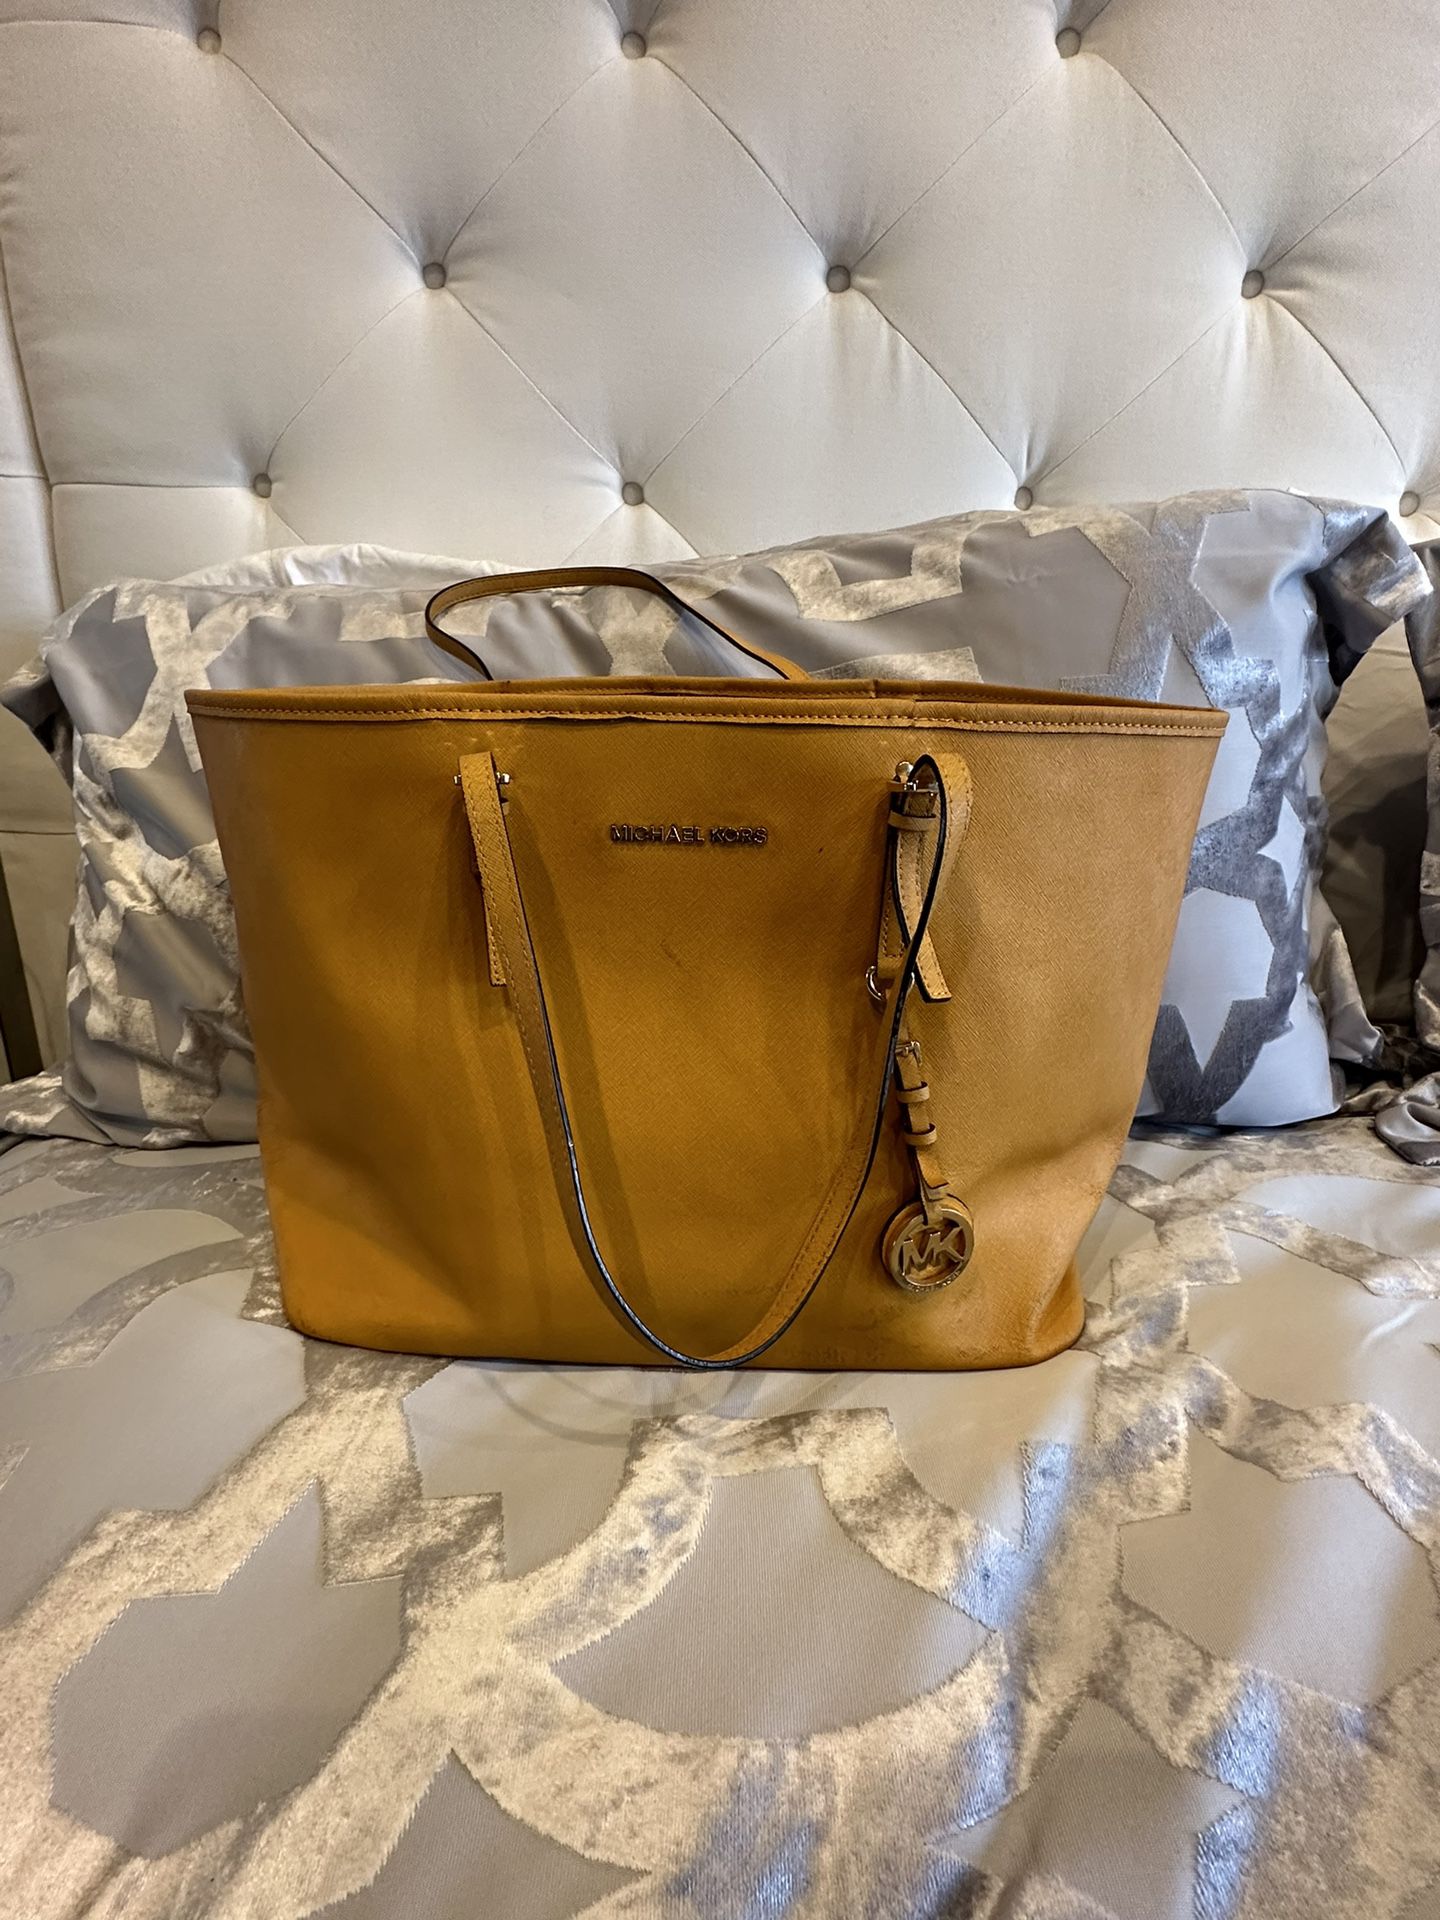 Michael Kors large Leather Tote 